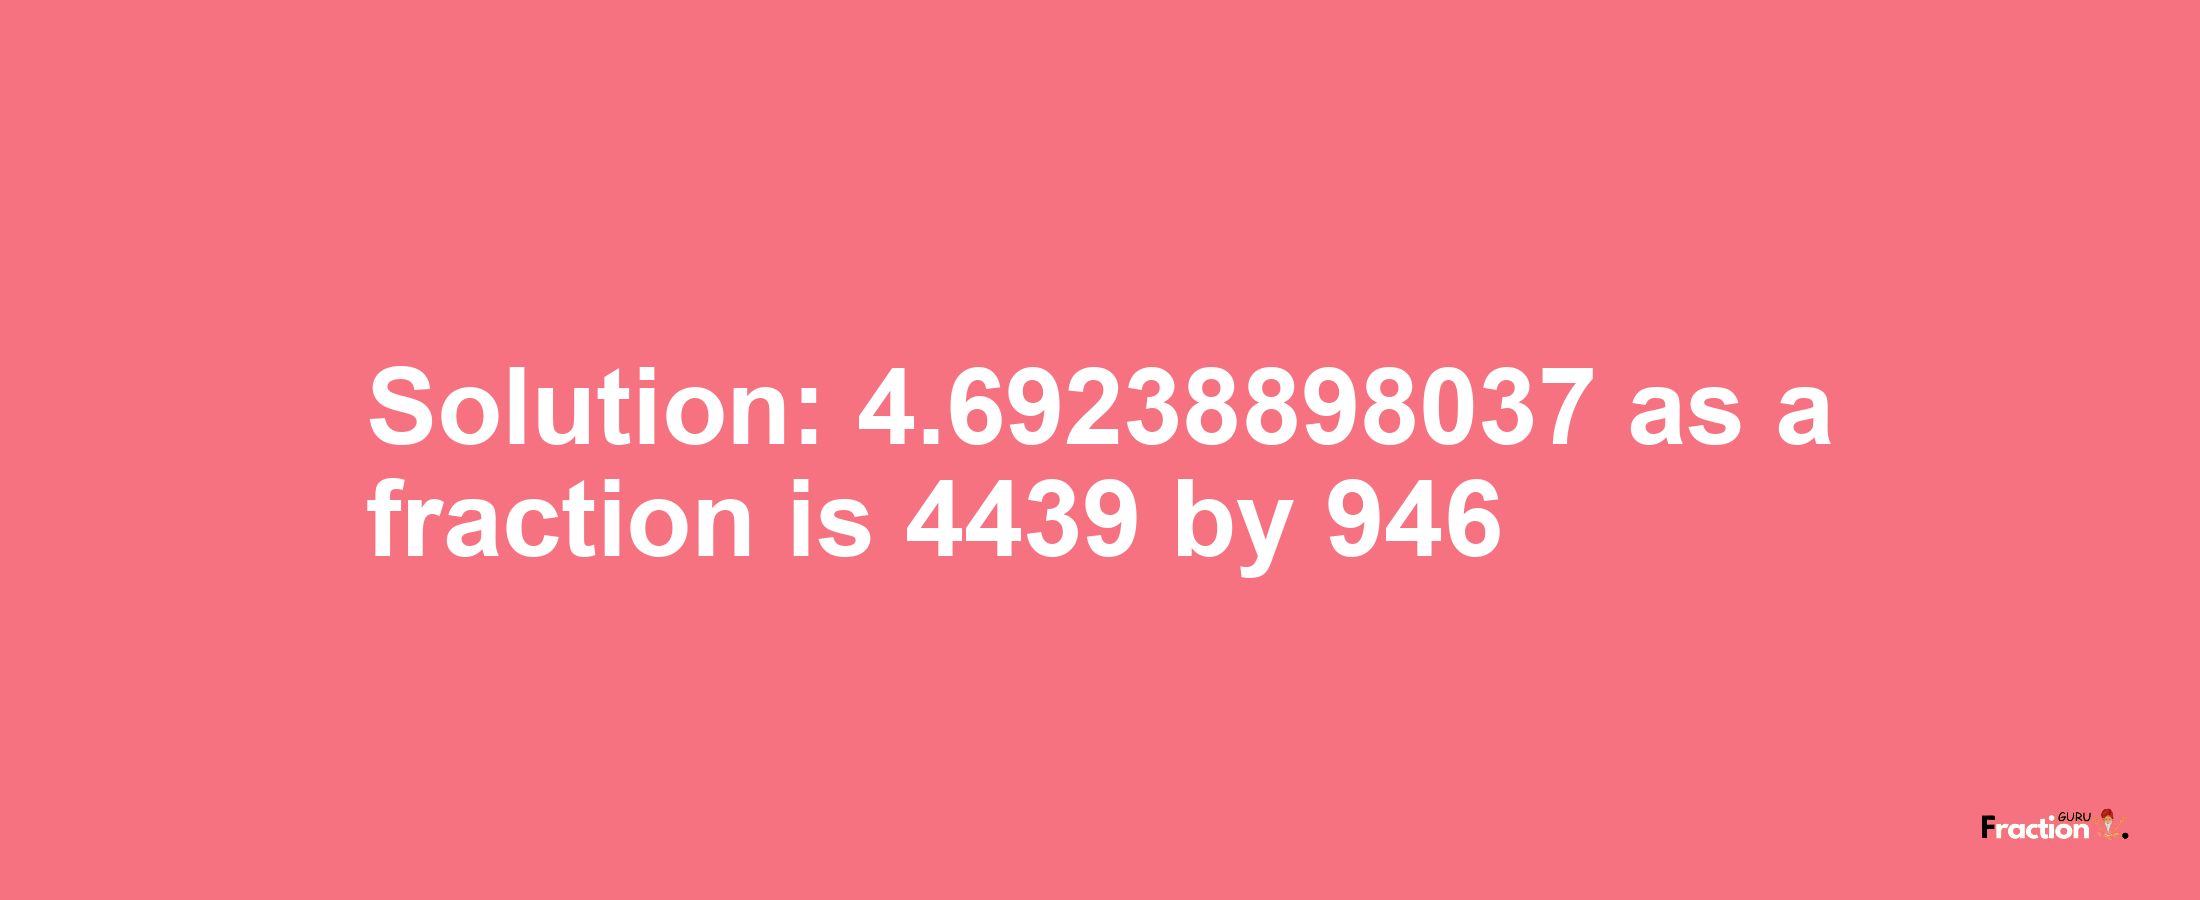 Solution:4.69238898037 as a fraction is 4439/946